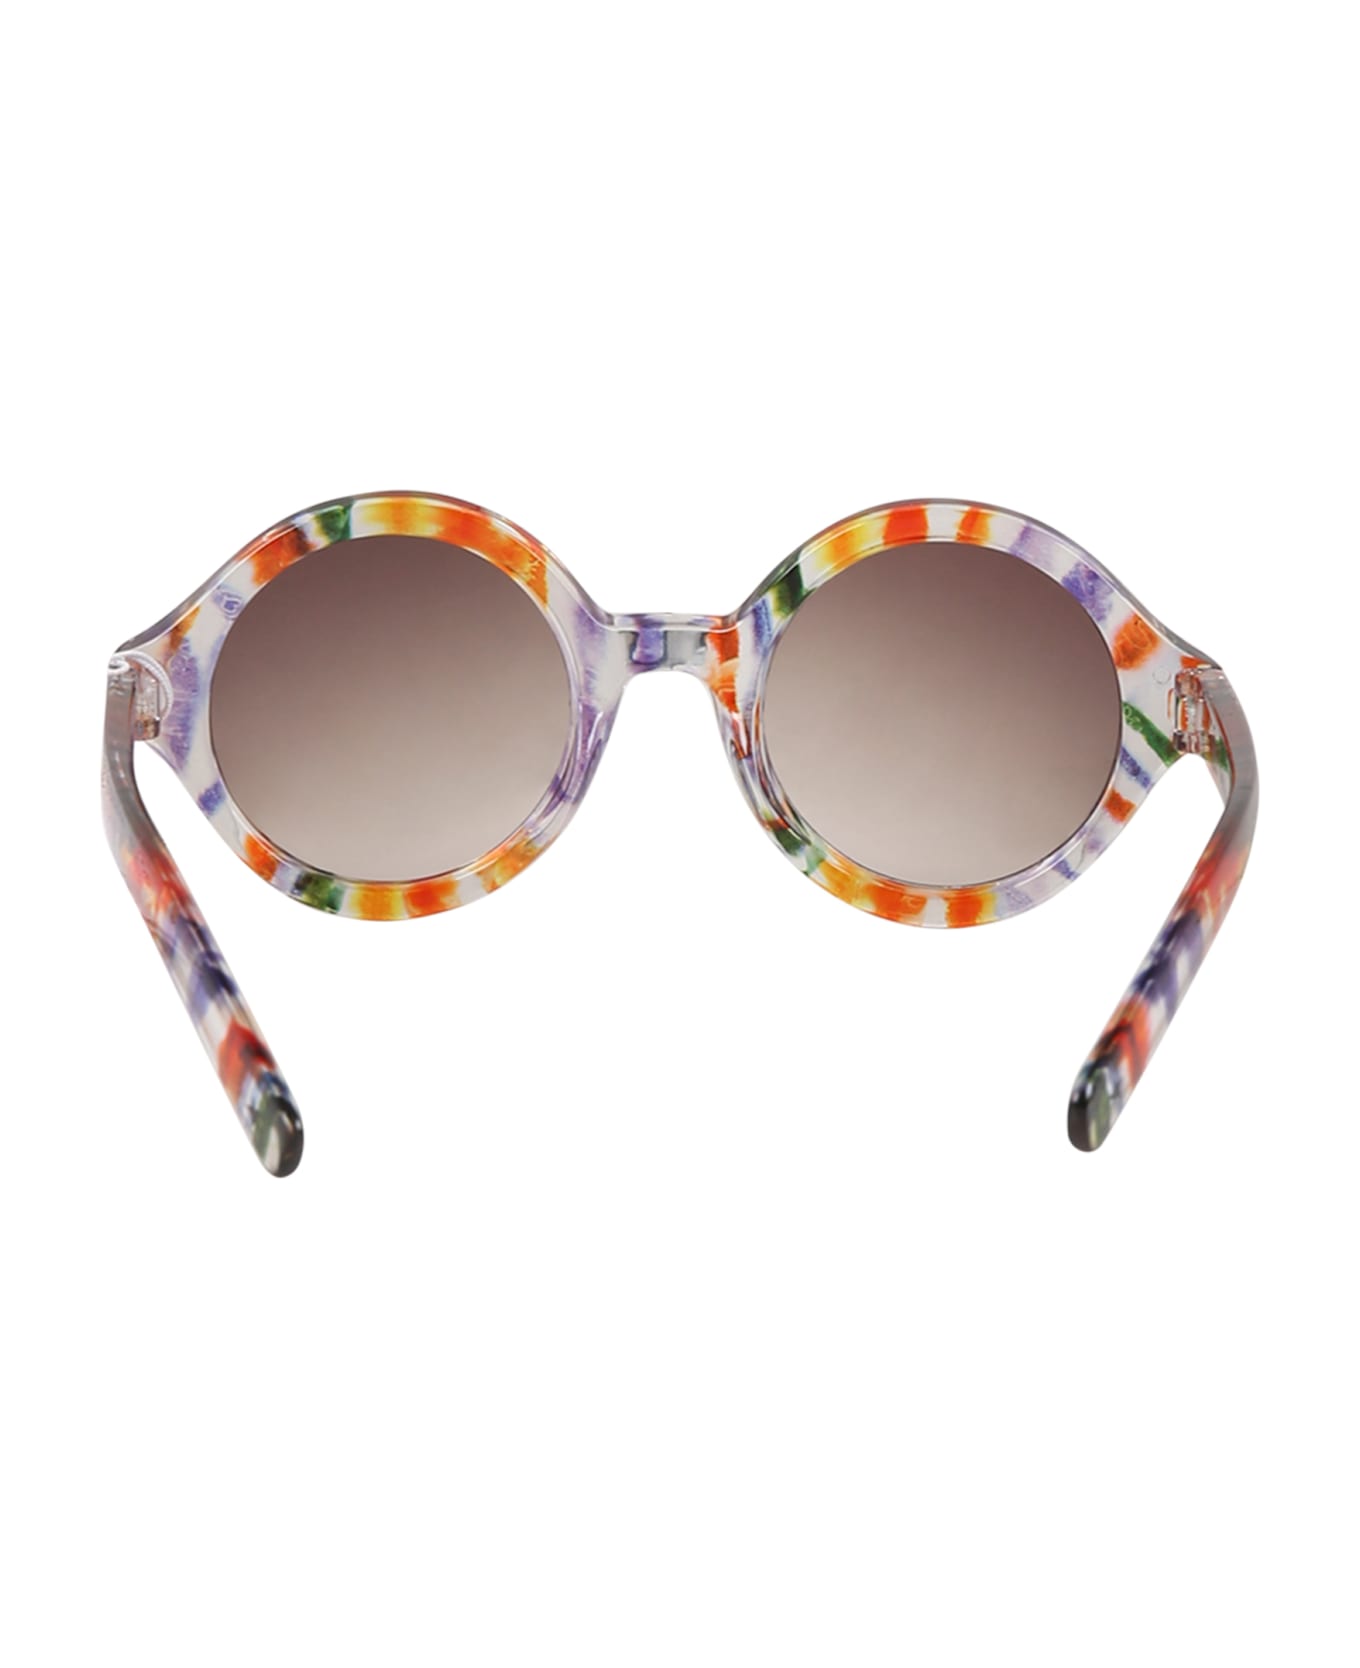 Molo Clear Shelby Sunglasses For Kids - Multicolor アクセサリー＆ギフト